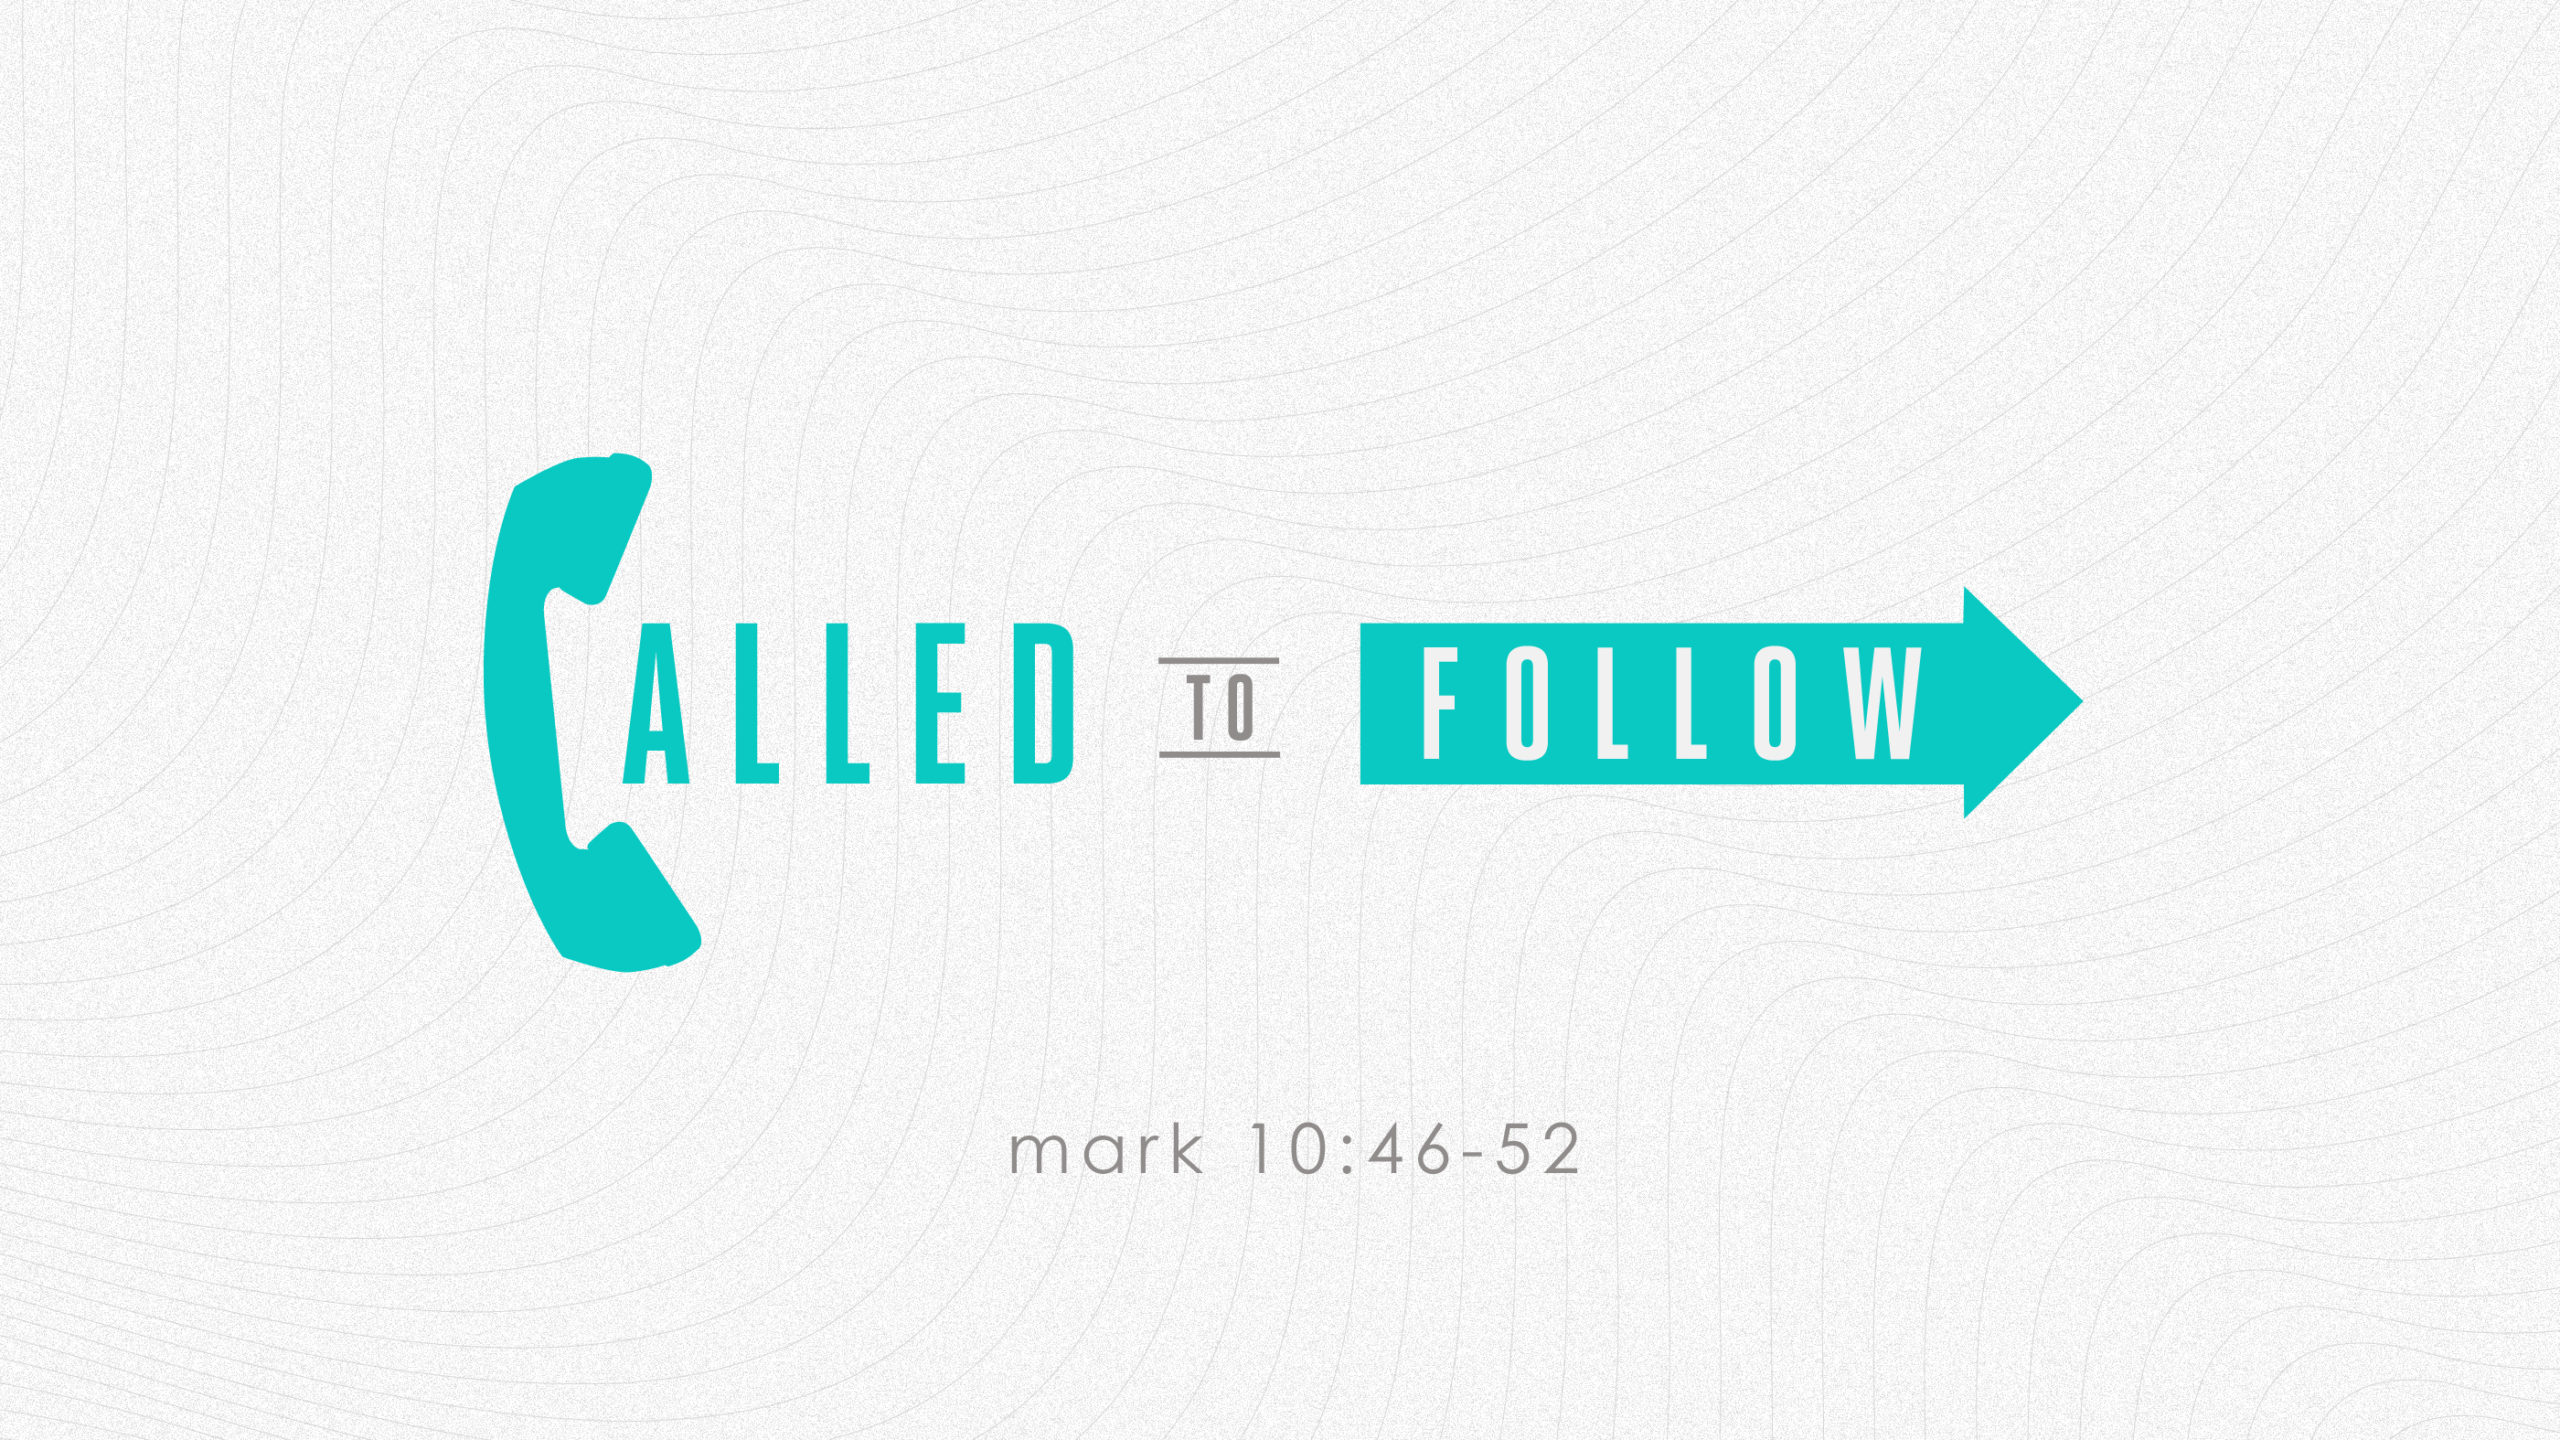 Called to Follow Image